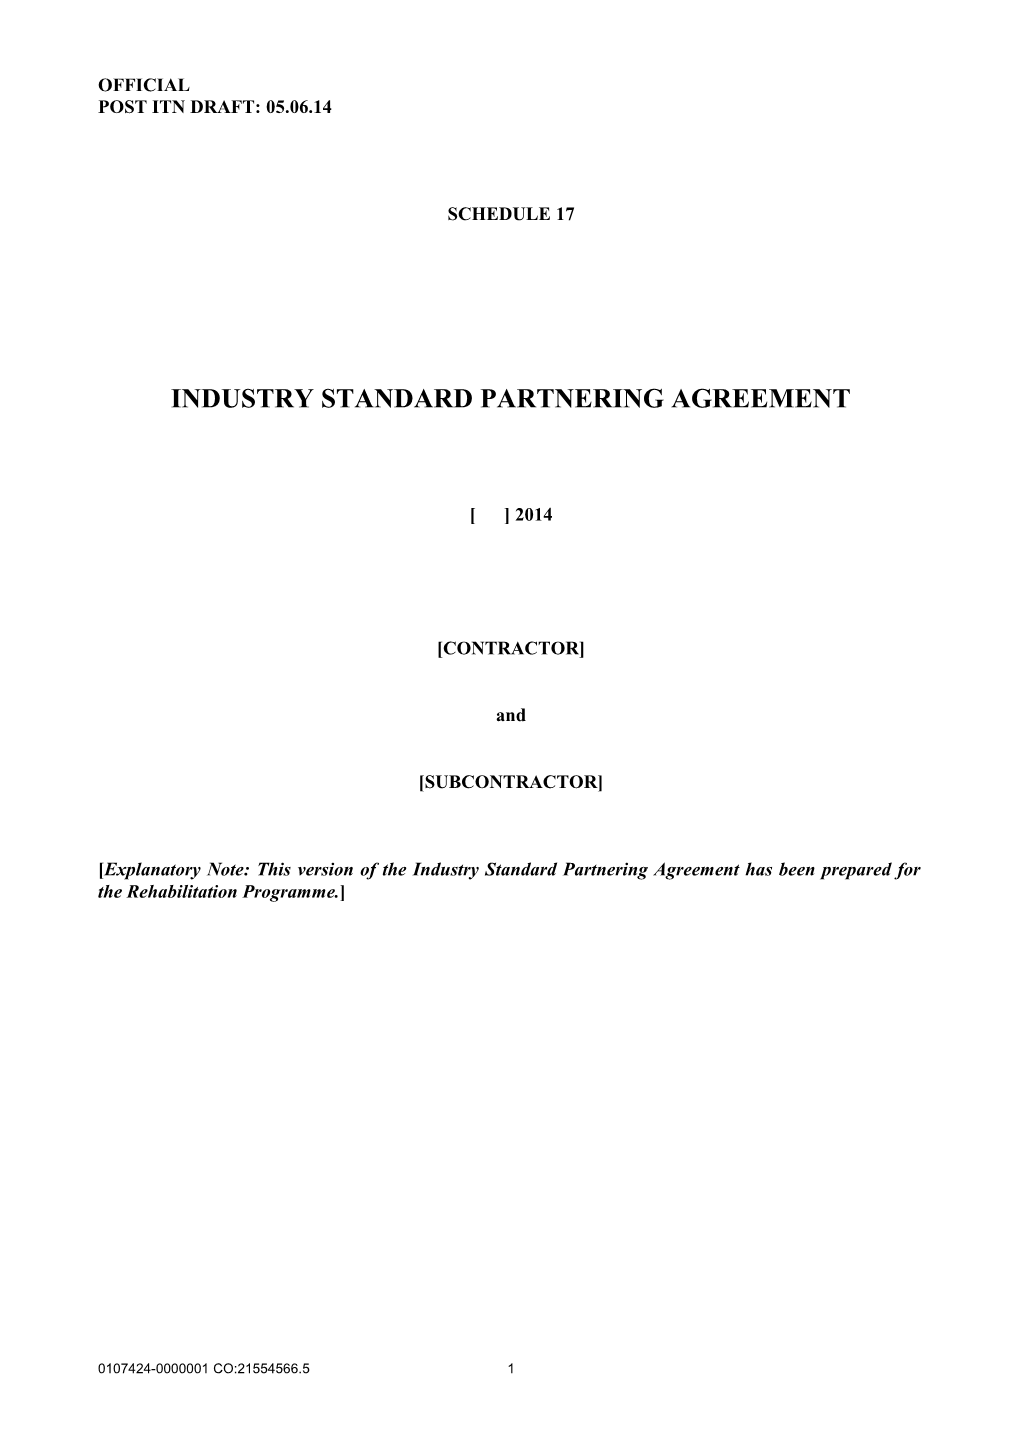 Explanatory Note: This Version of the Industry Standard Partnering Agreement Has Been